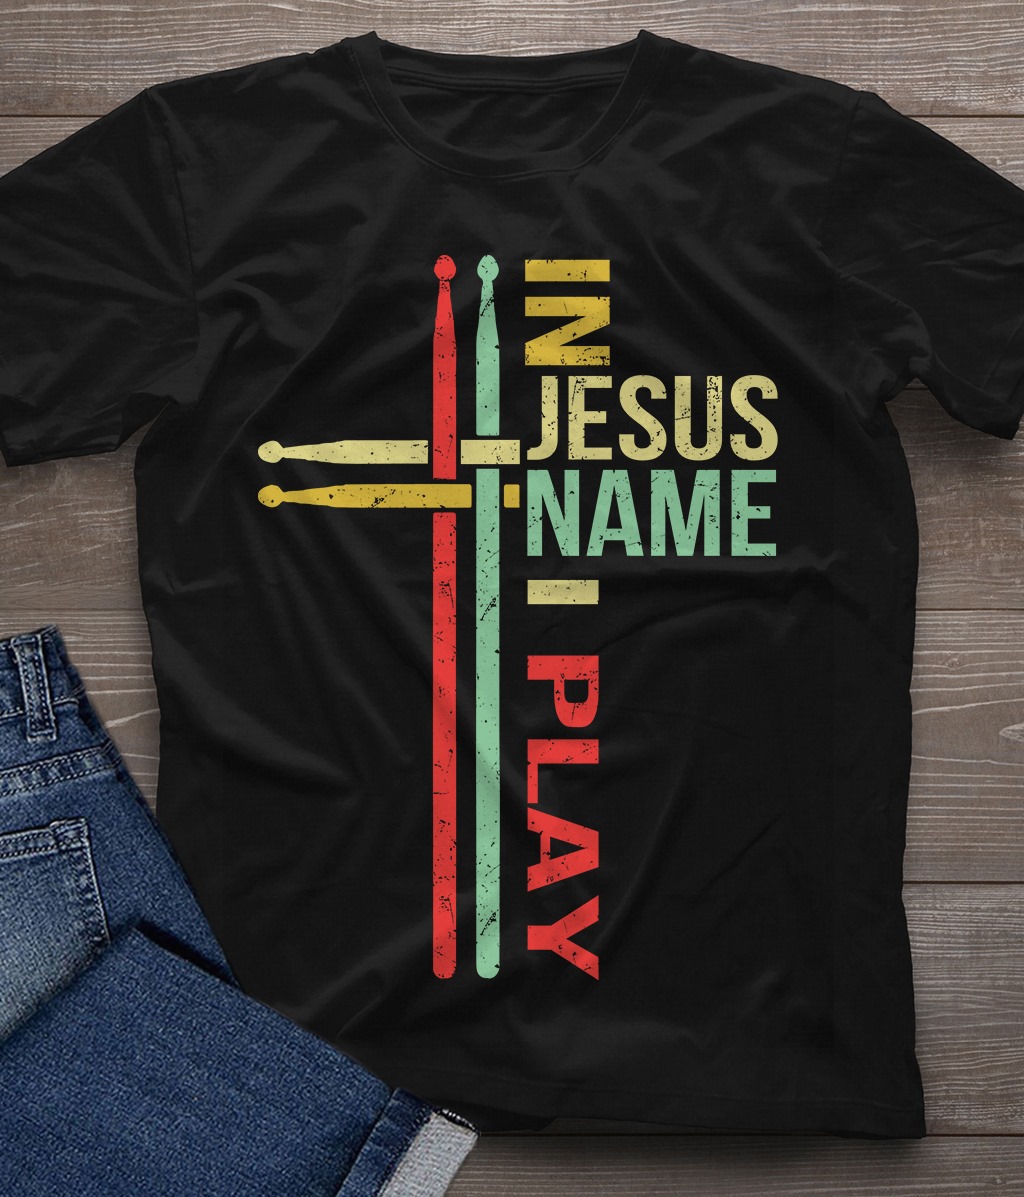 In Jesus name I play - The drummer